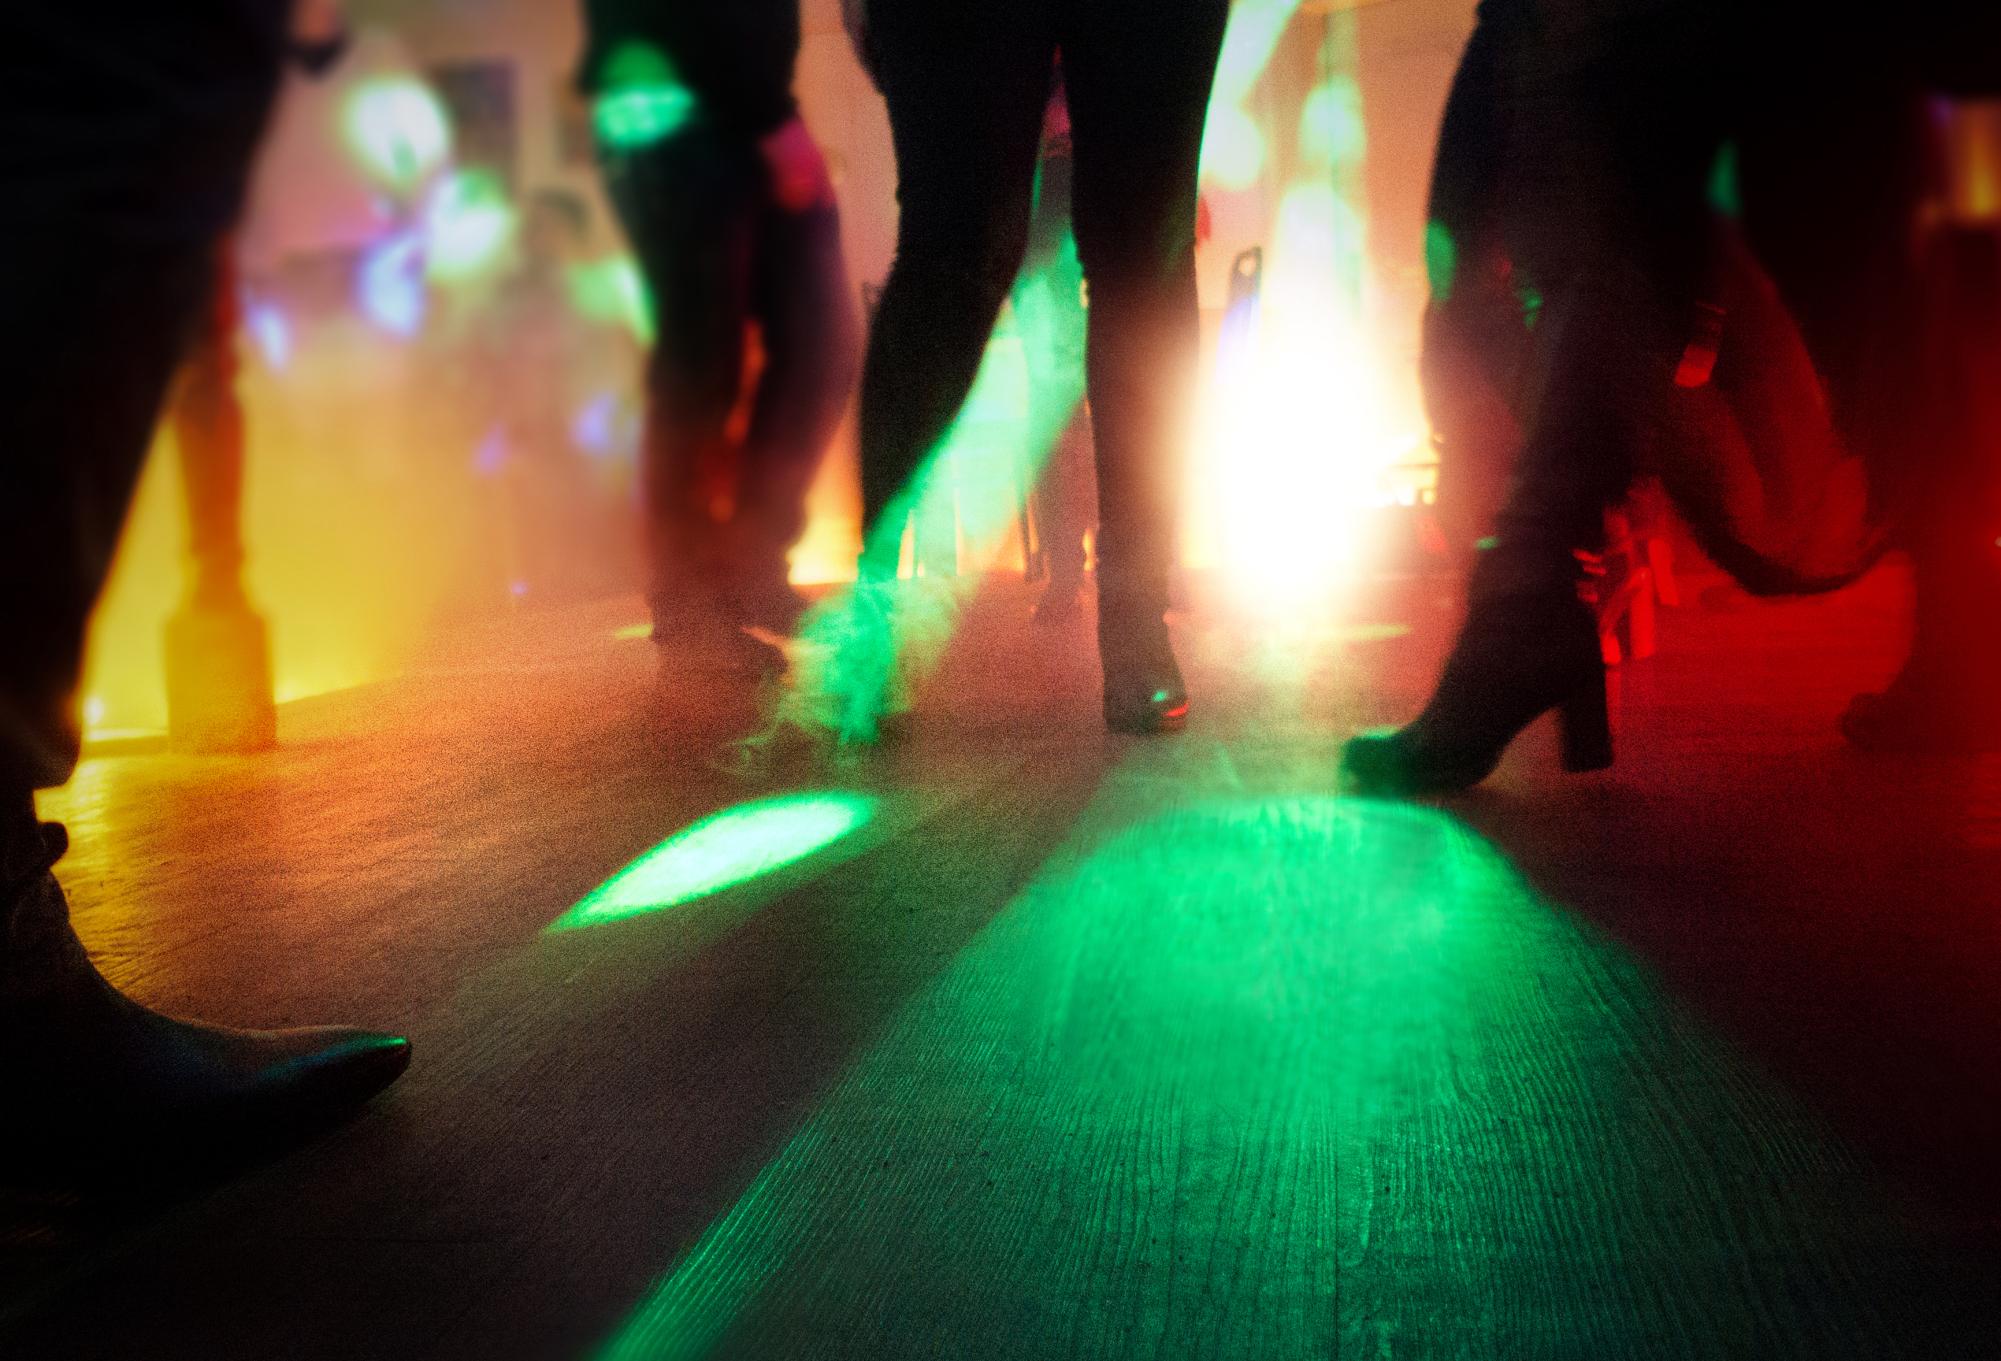 A group of people dance on a hardwood floor with red and green lights. Dance Dimension is set to hold its third annual Tinsel an Tutu event in December. (Courtesy of Getty Images)